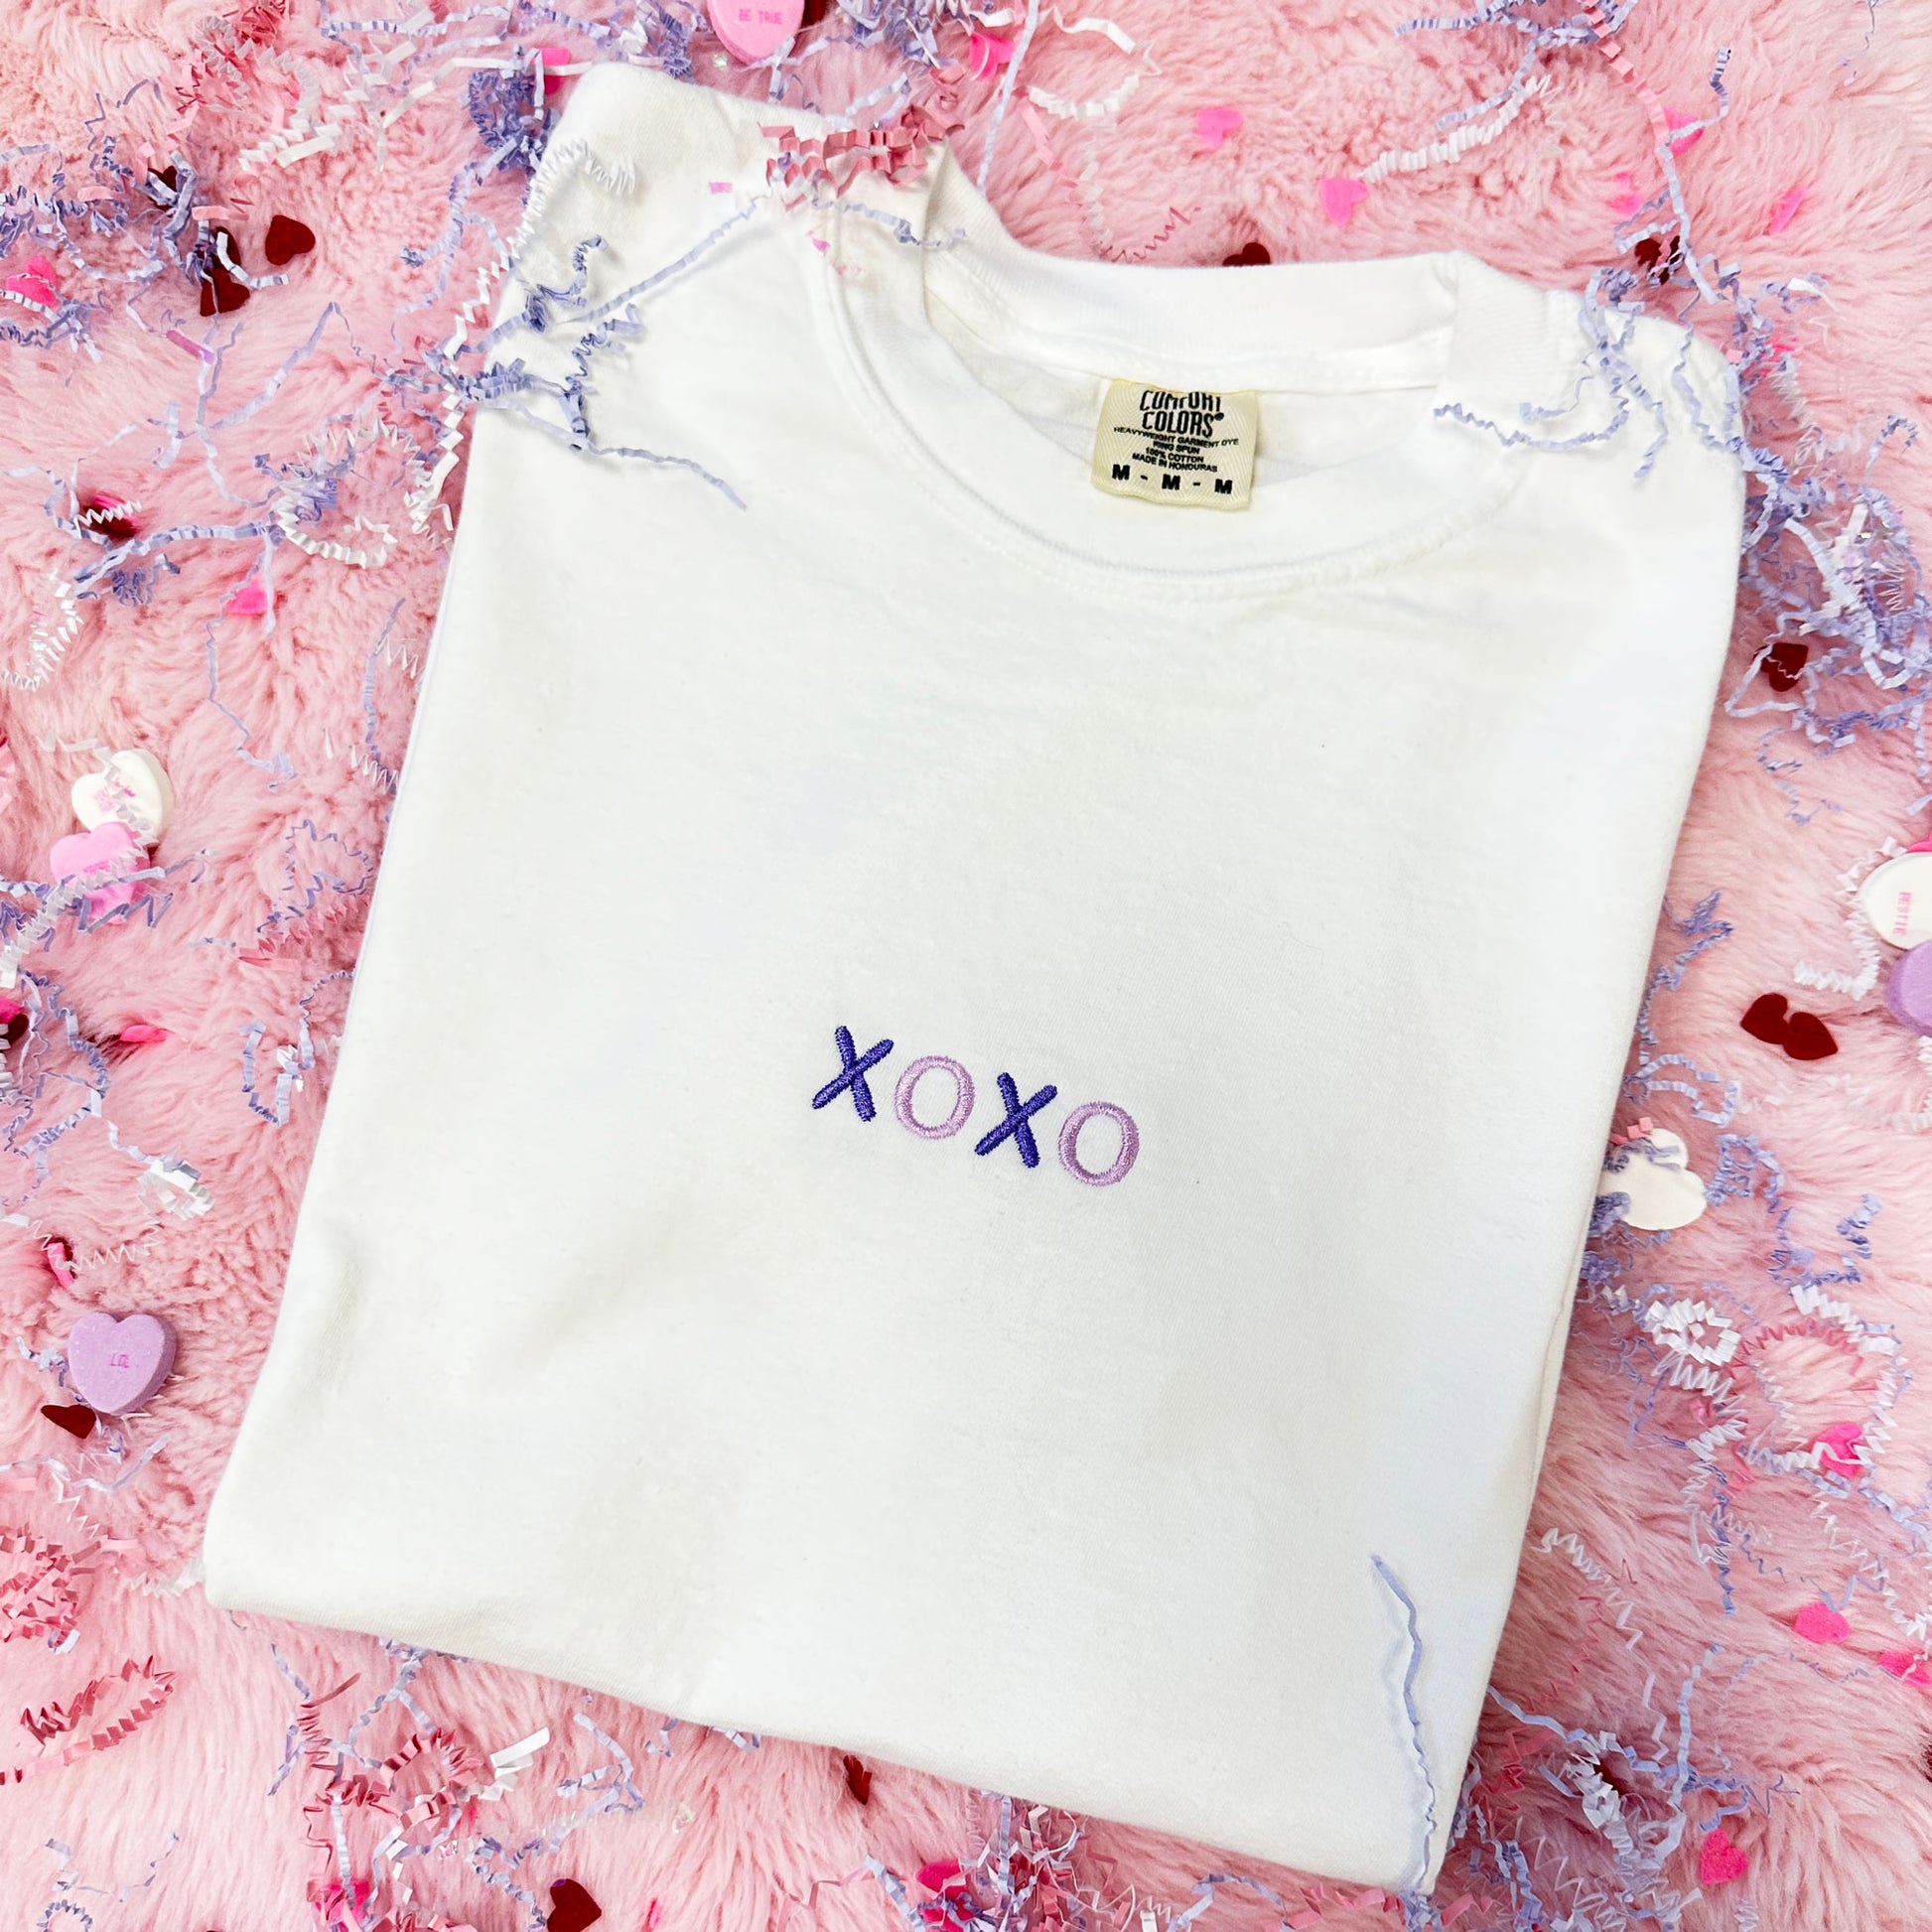 White tshirt with xoxo small embroidered across the center chest